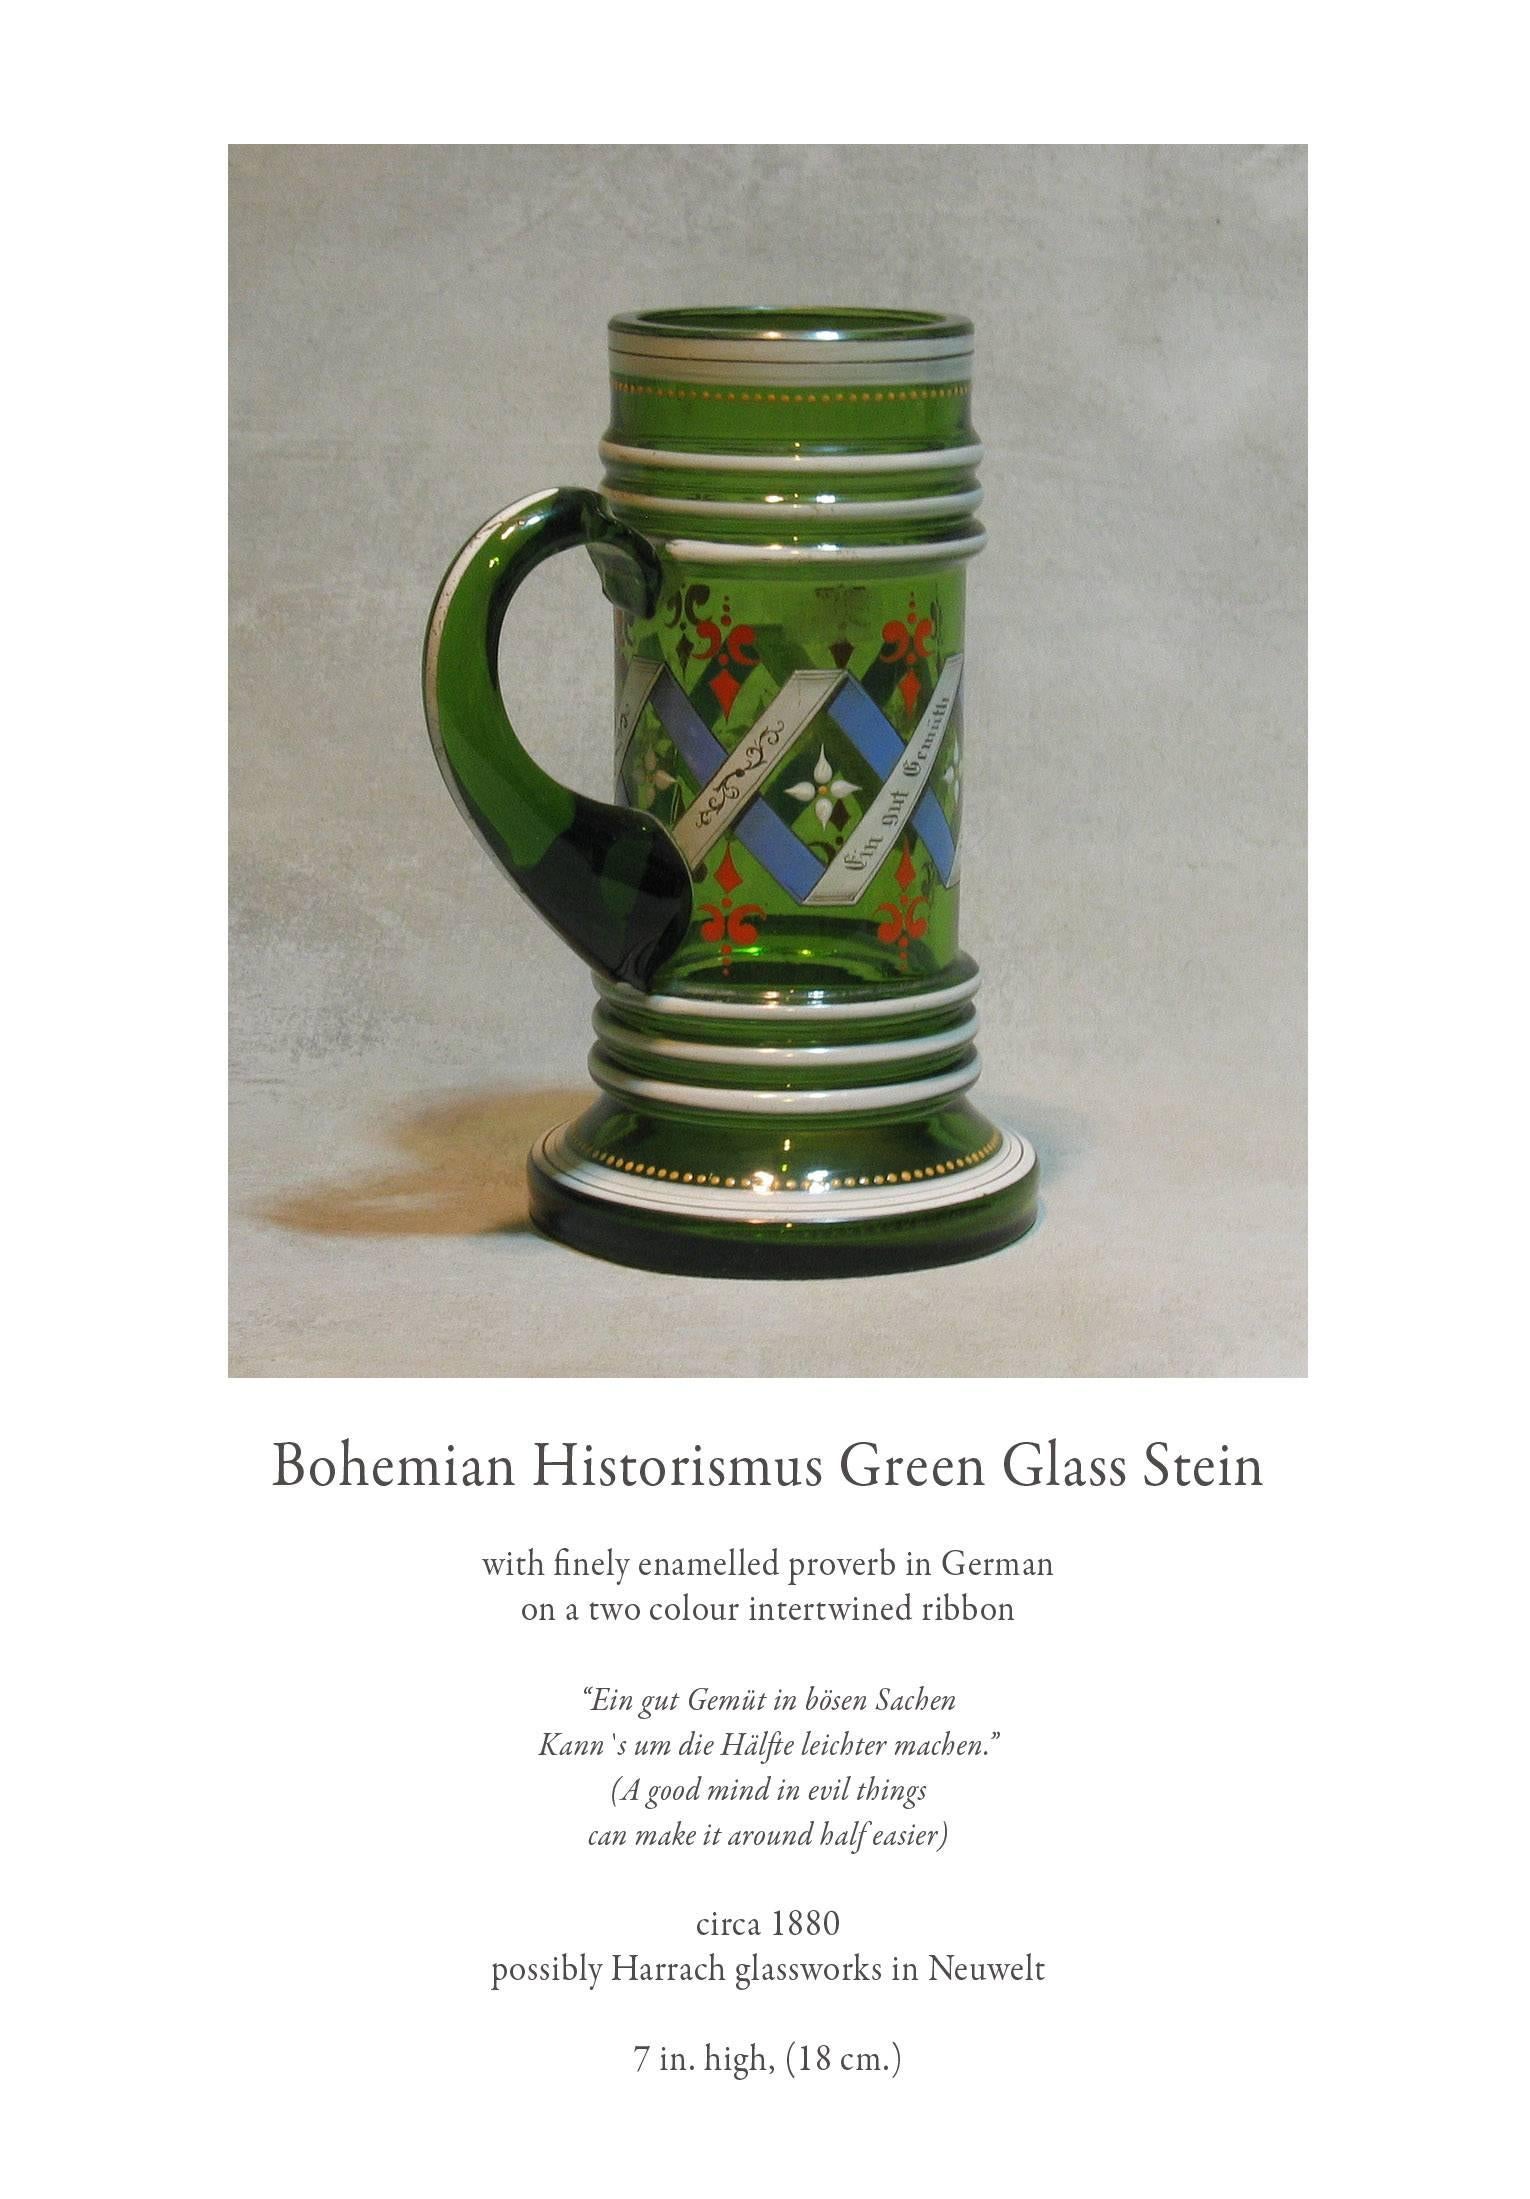 Bohemian Historismus green glass stein with finely enameled proverb in German on a two colored intertwined ribbon. 
Saying and translation.
 